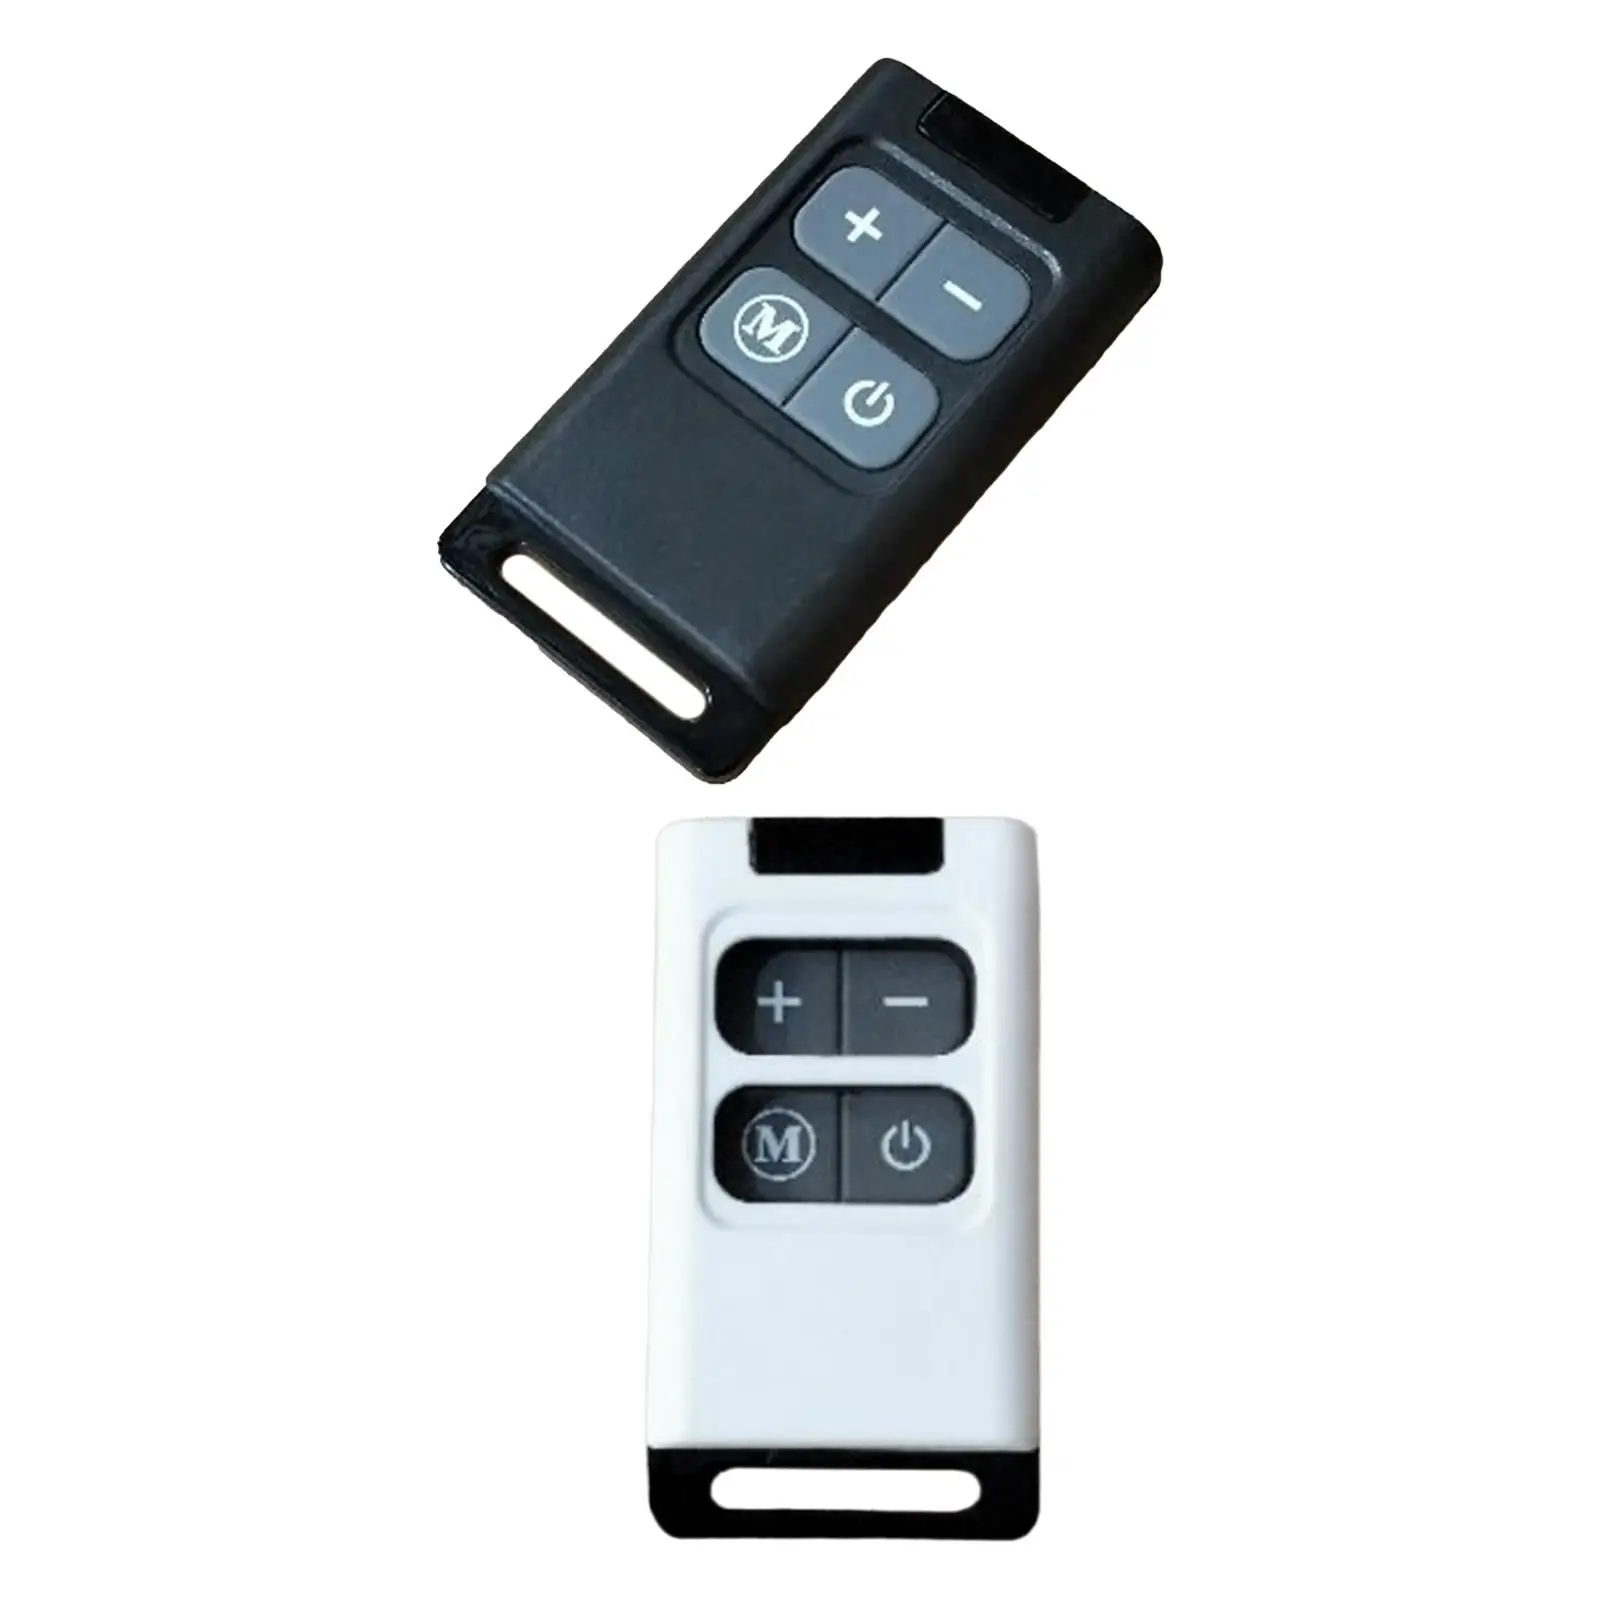 Car Parking Heater Remote Control Universal for Heater Controller Boat RV Motorhomes Car Diesels Air Heater Parking Heater